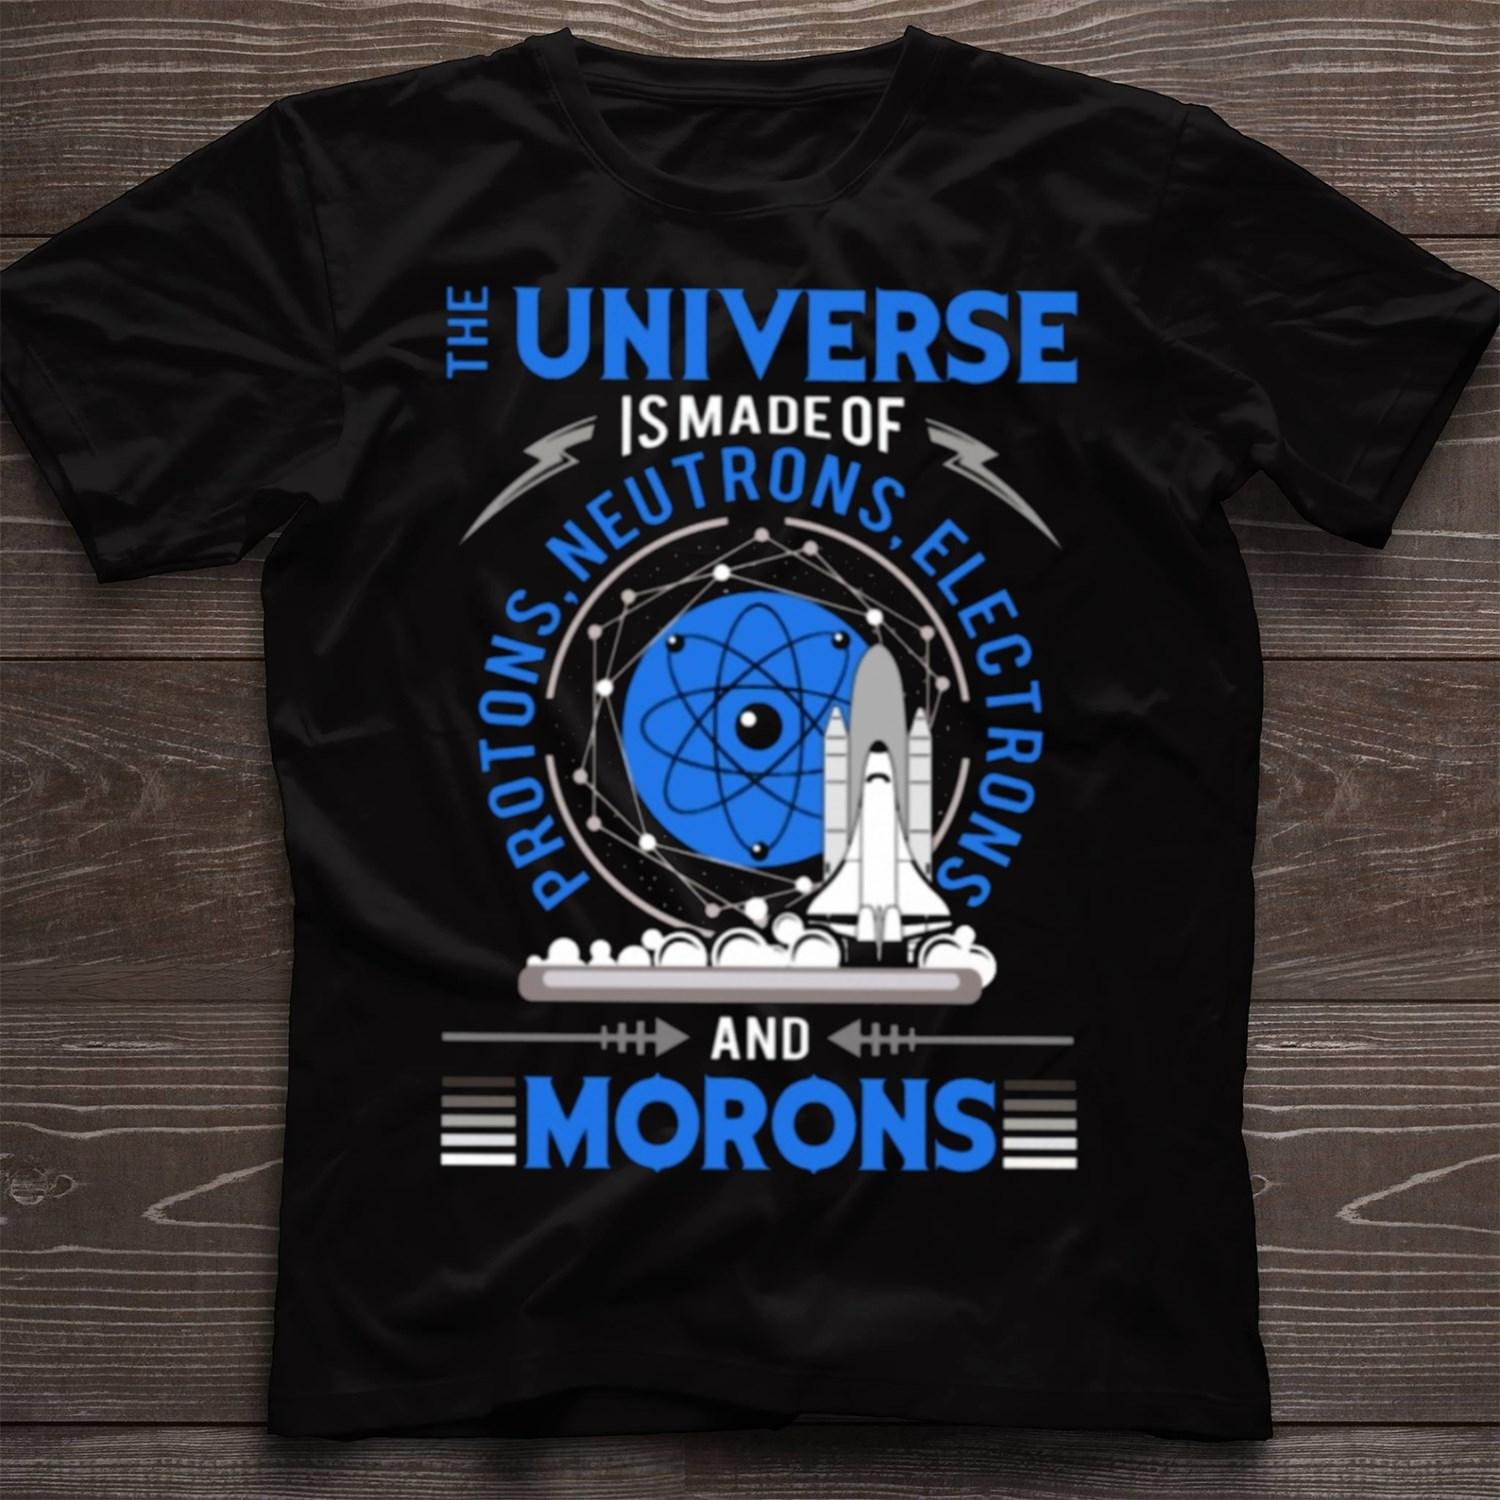 The universe is made of proton, neutrons, electrons and morons - The science development, spaceship graphic T-shirt